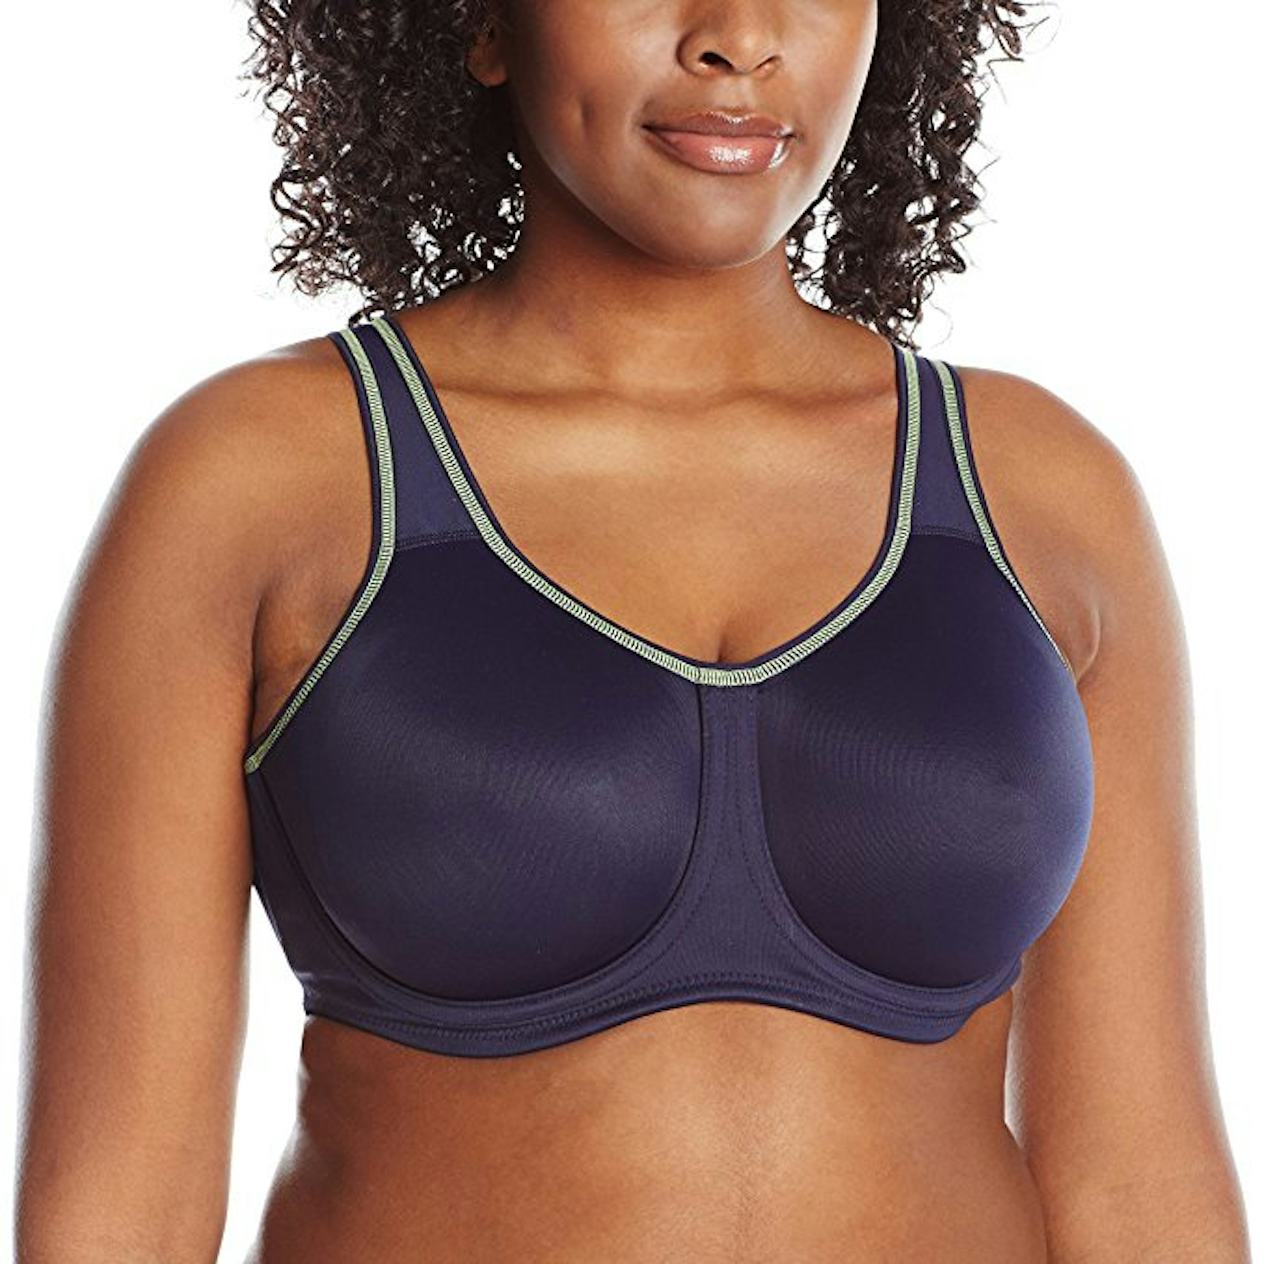 The 9 Best Sports Bras For Ddd Cups 